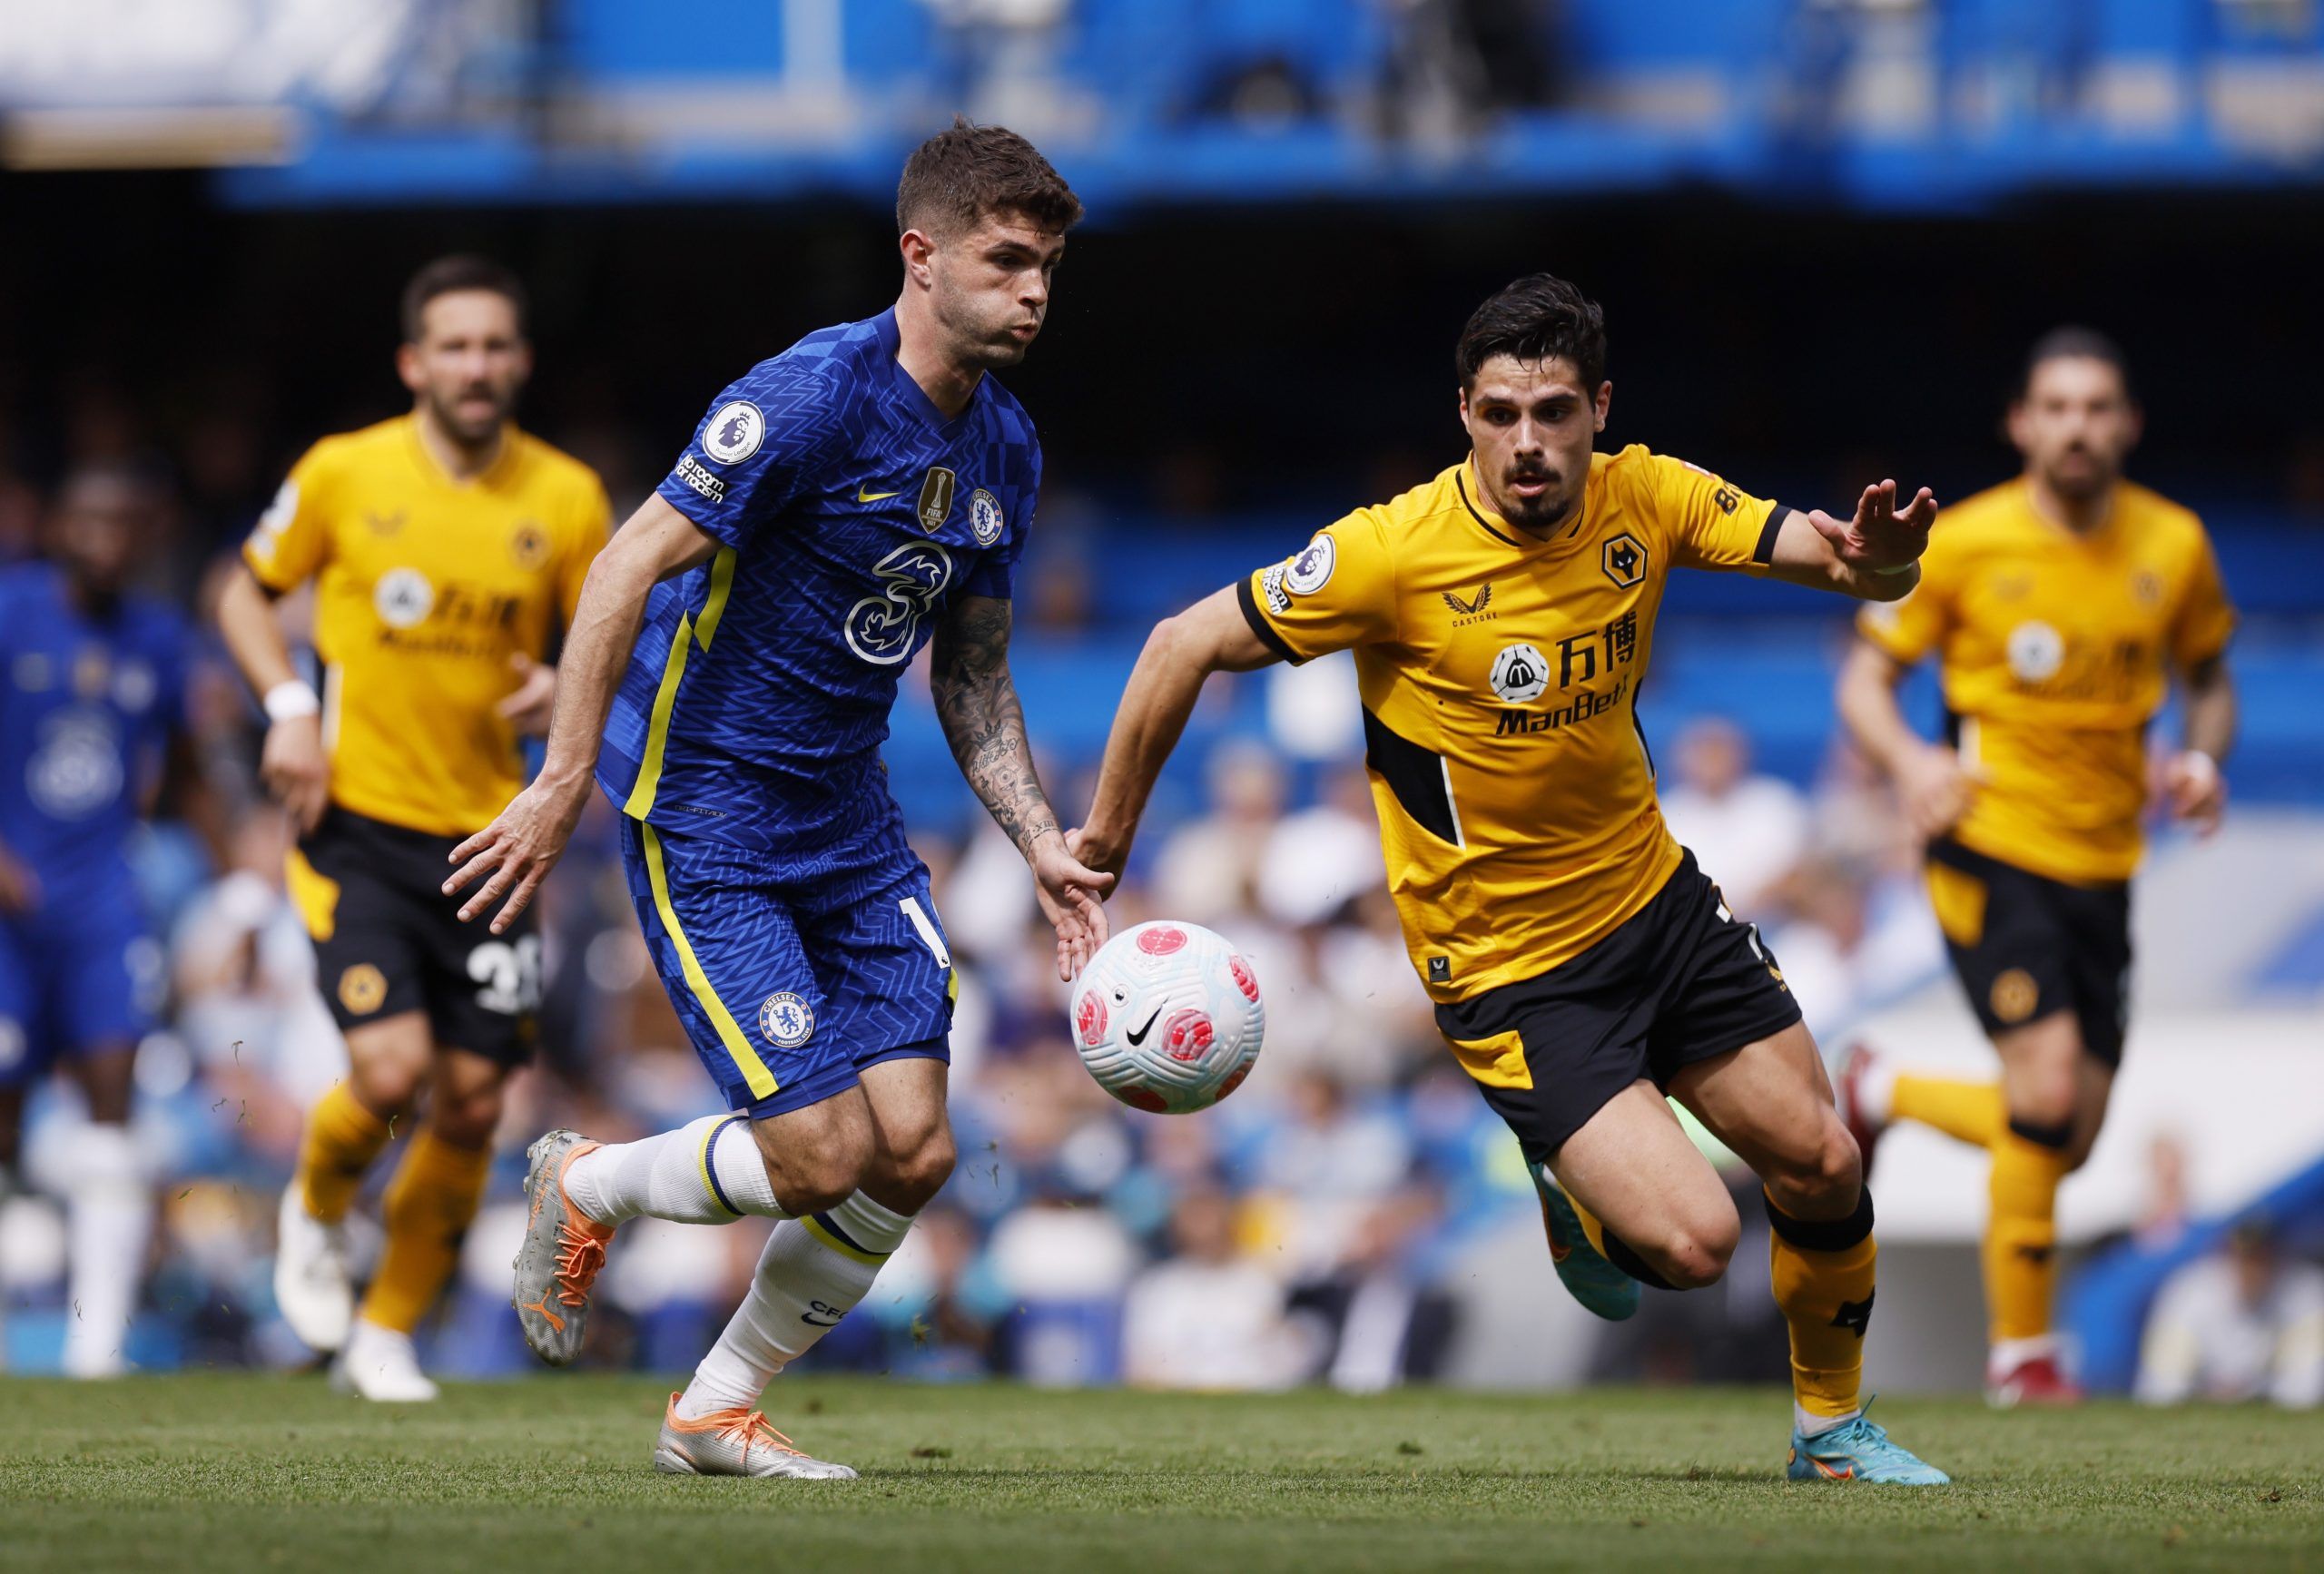 Soccer Football - Premier League - Chelsea v Wolverhampton Wanderers - Stamford Bridge, London, Britain - May 7, 2022 Chelsea's Christian Pulisic in action with Wolverhampton Wanderers' Pedro Neto Action Images via Reuters/Andrew Couldridge EDITORIAL USE ONLY. No use with unauthorized audio, video, data, fixture lists, club/league logos or 'live' services. Online in-match use limited to 75 images, no video emulation. No use in betting, games or single club /league/player publications.  Please co